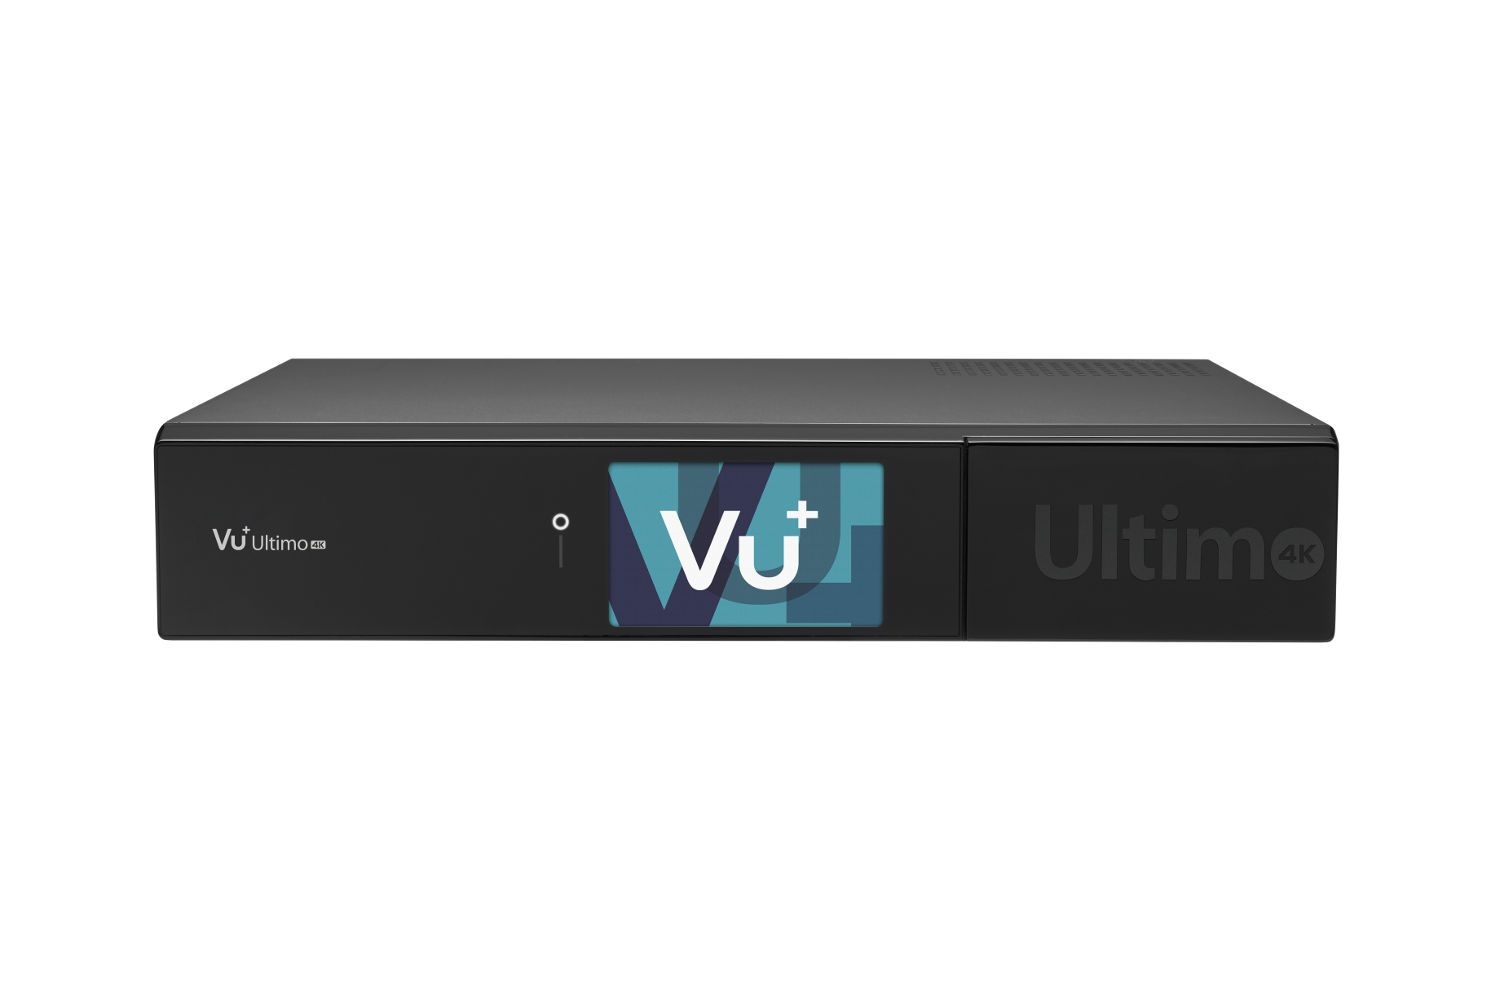 VU+ Ultimo 4K 1x DVB-S2X FBC Twin / 1x DVB-S2 Tuner 4 TB HDD Linux Receiver UHD 2160p